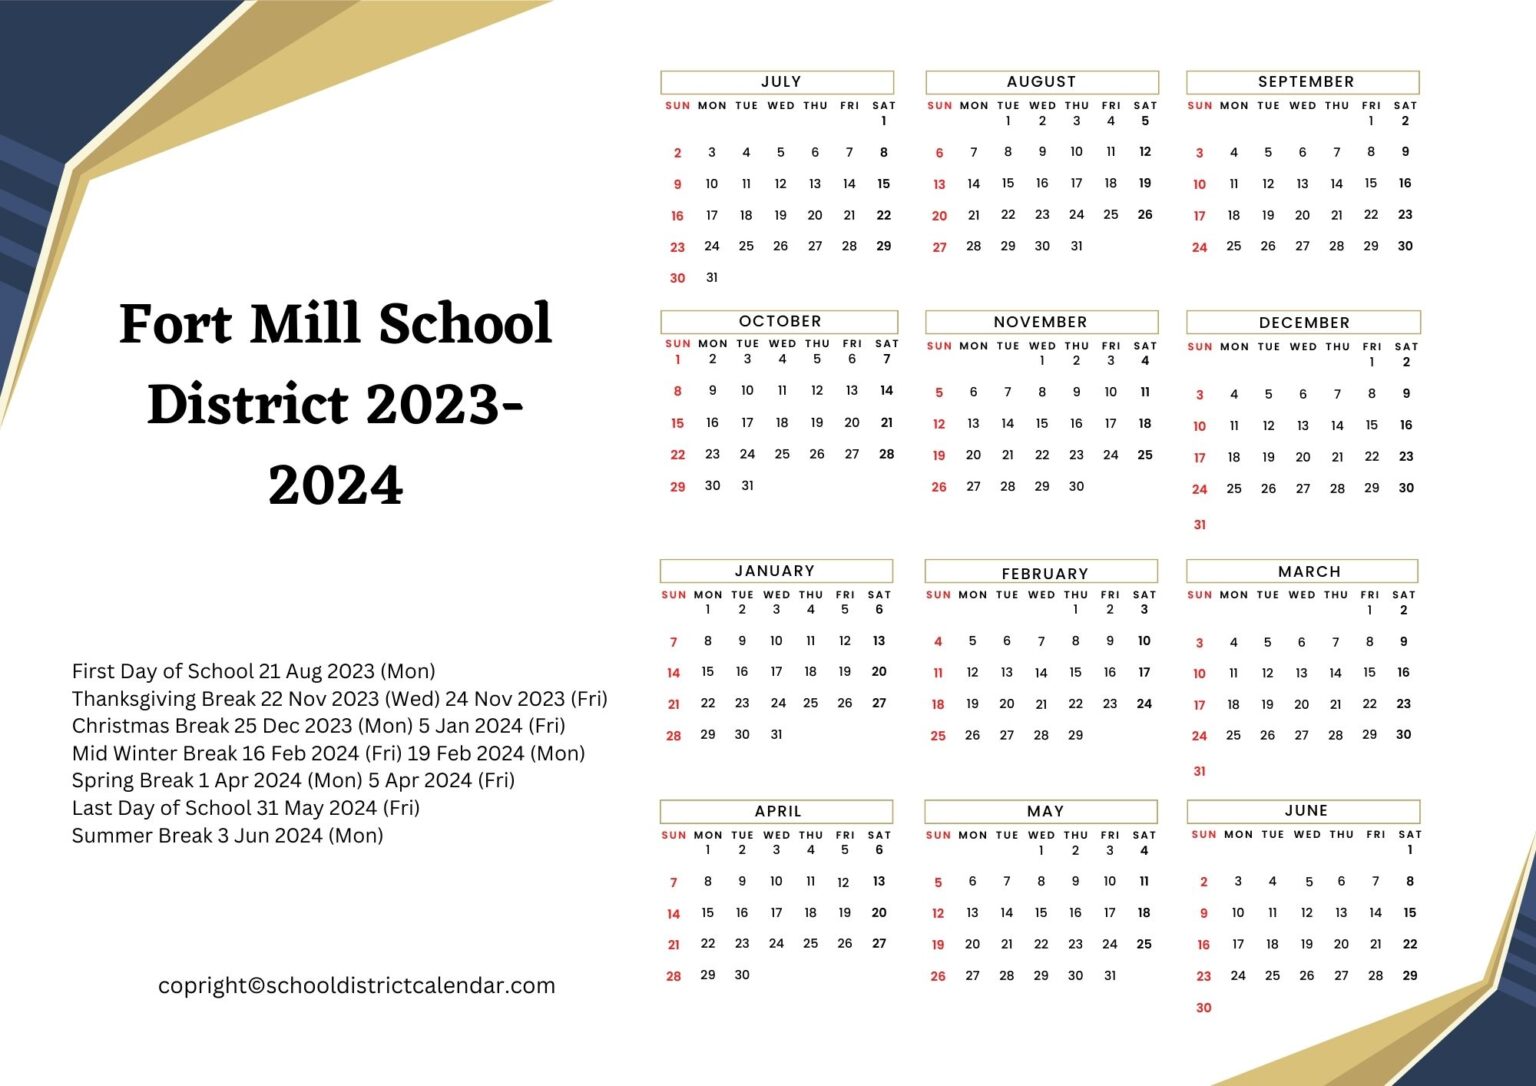 Fort Mill School District Calendar Archives School District Calendar